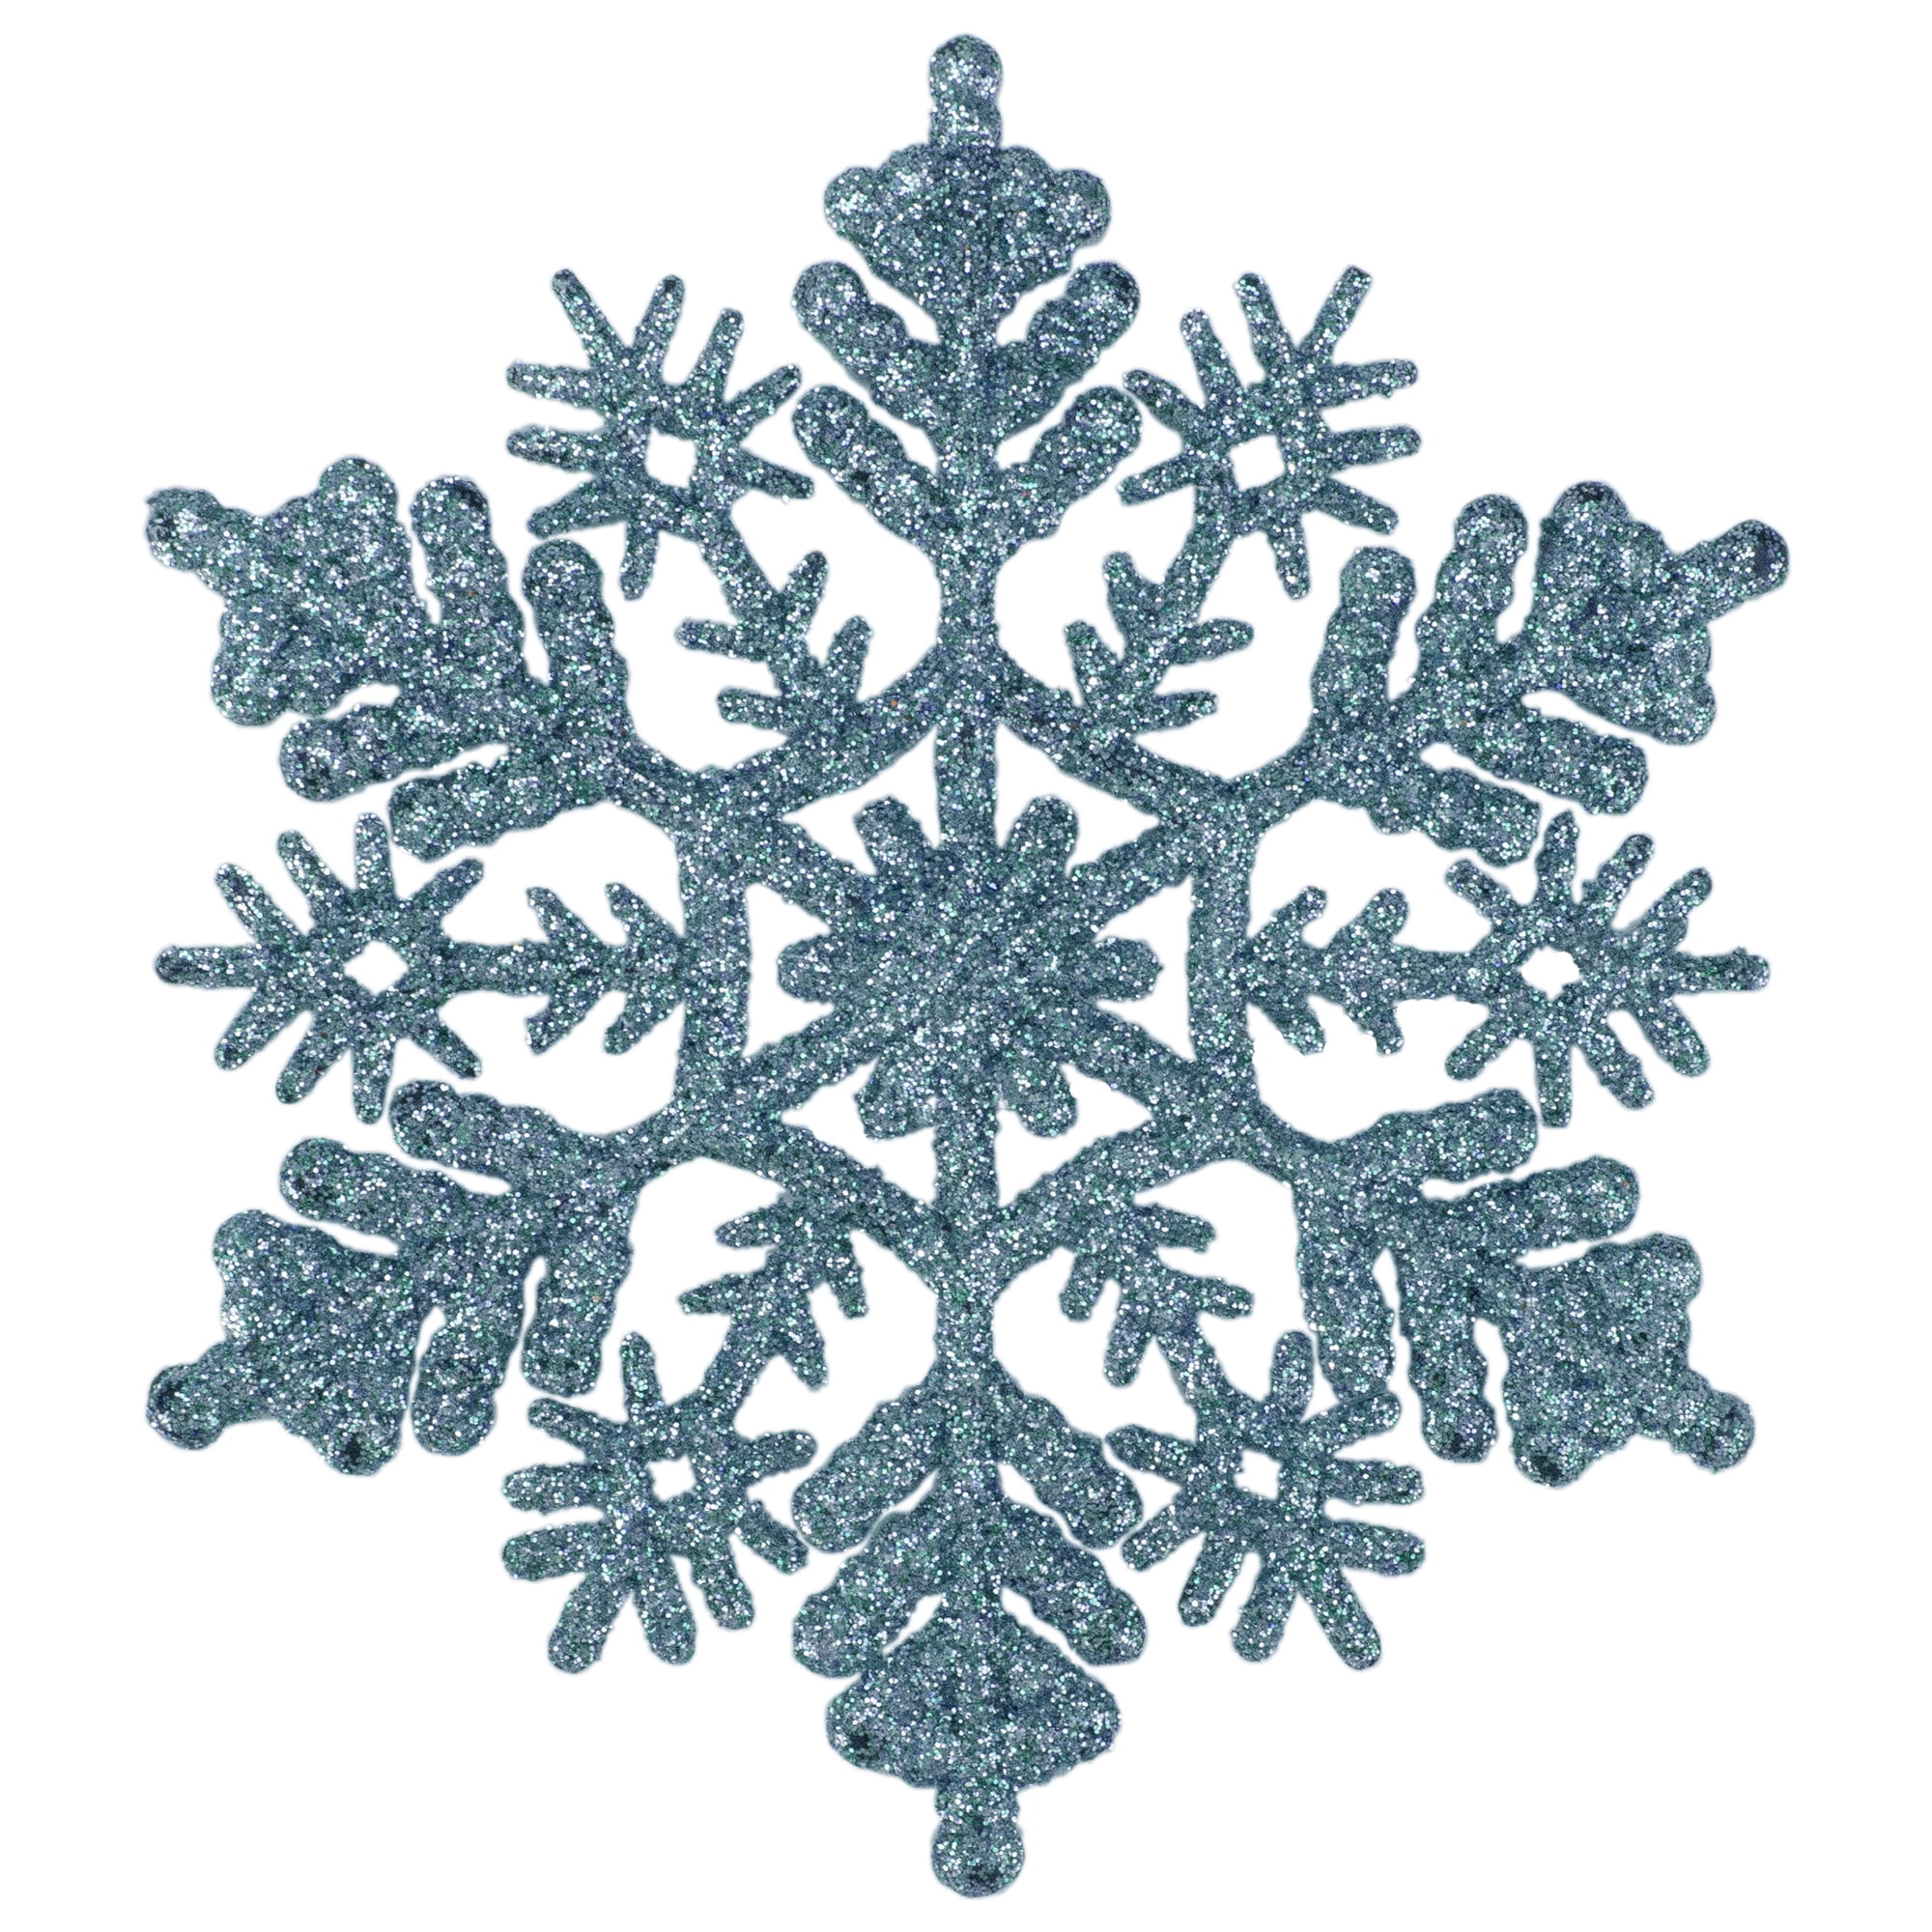 Northlight 24ct Glitter Snowflake Christmas Ornament Set 4 quot Turquoise 